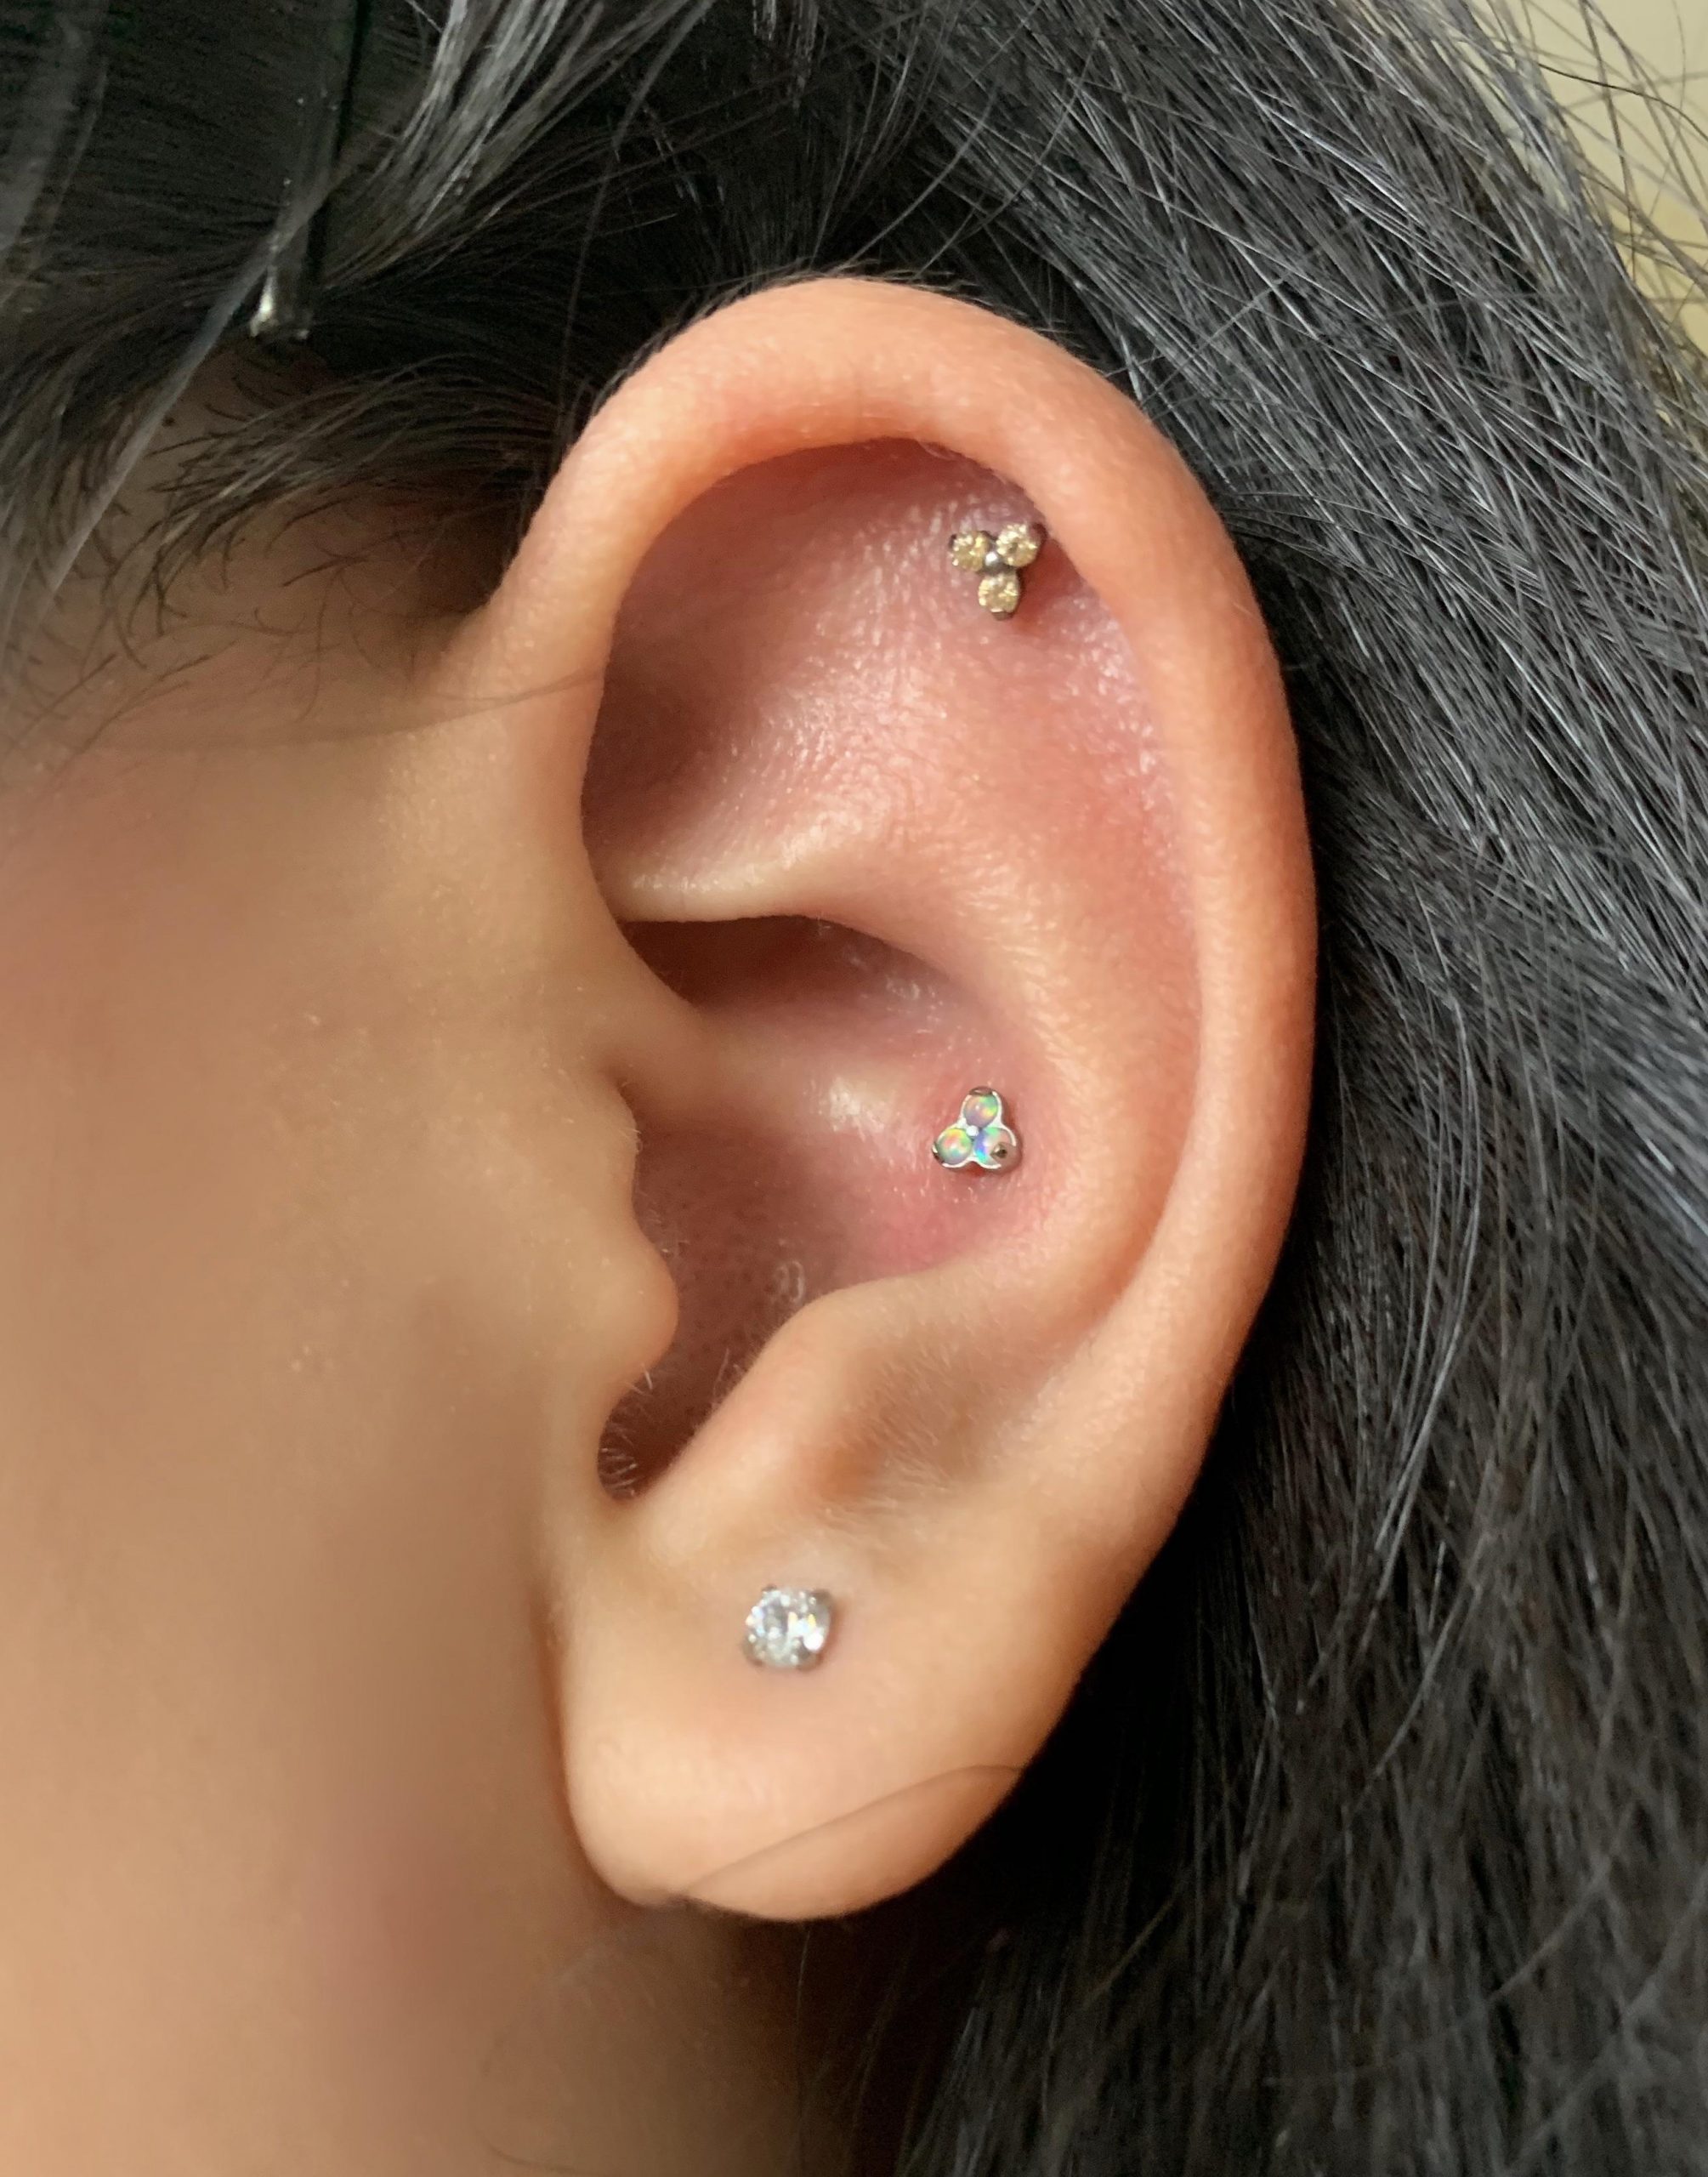 How should I complete this ear? : piercing